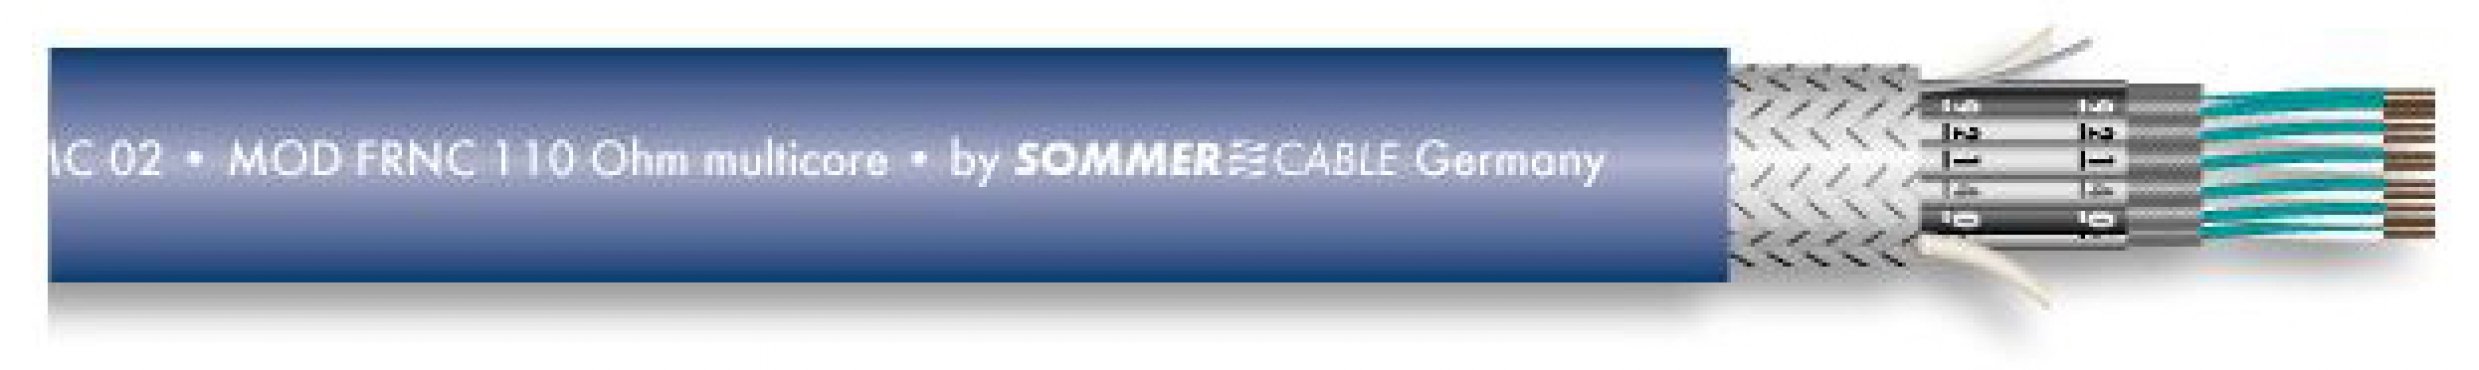 Sommer Cable 100-0302-16 Matrix MMC 16 FRNC 110 Ohm